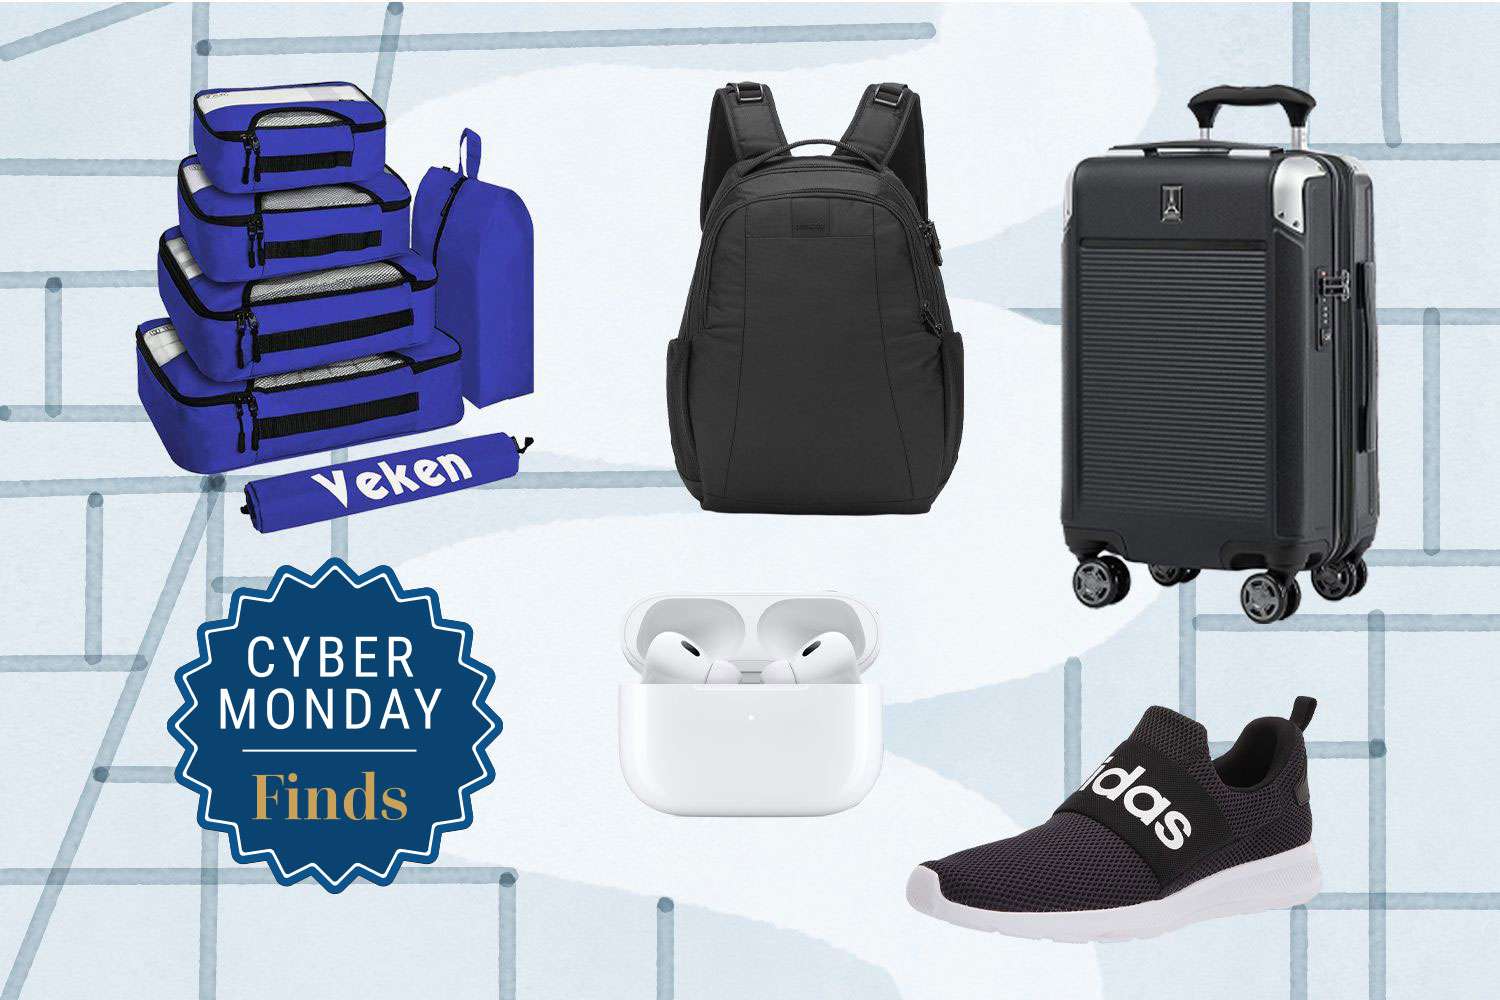 Epic Prime Day Deals: Up to 50% Off Samsonite Travel Essentials - Limited Time Only! 15